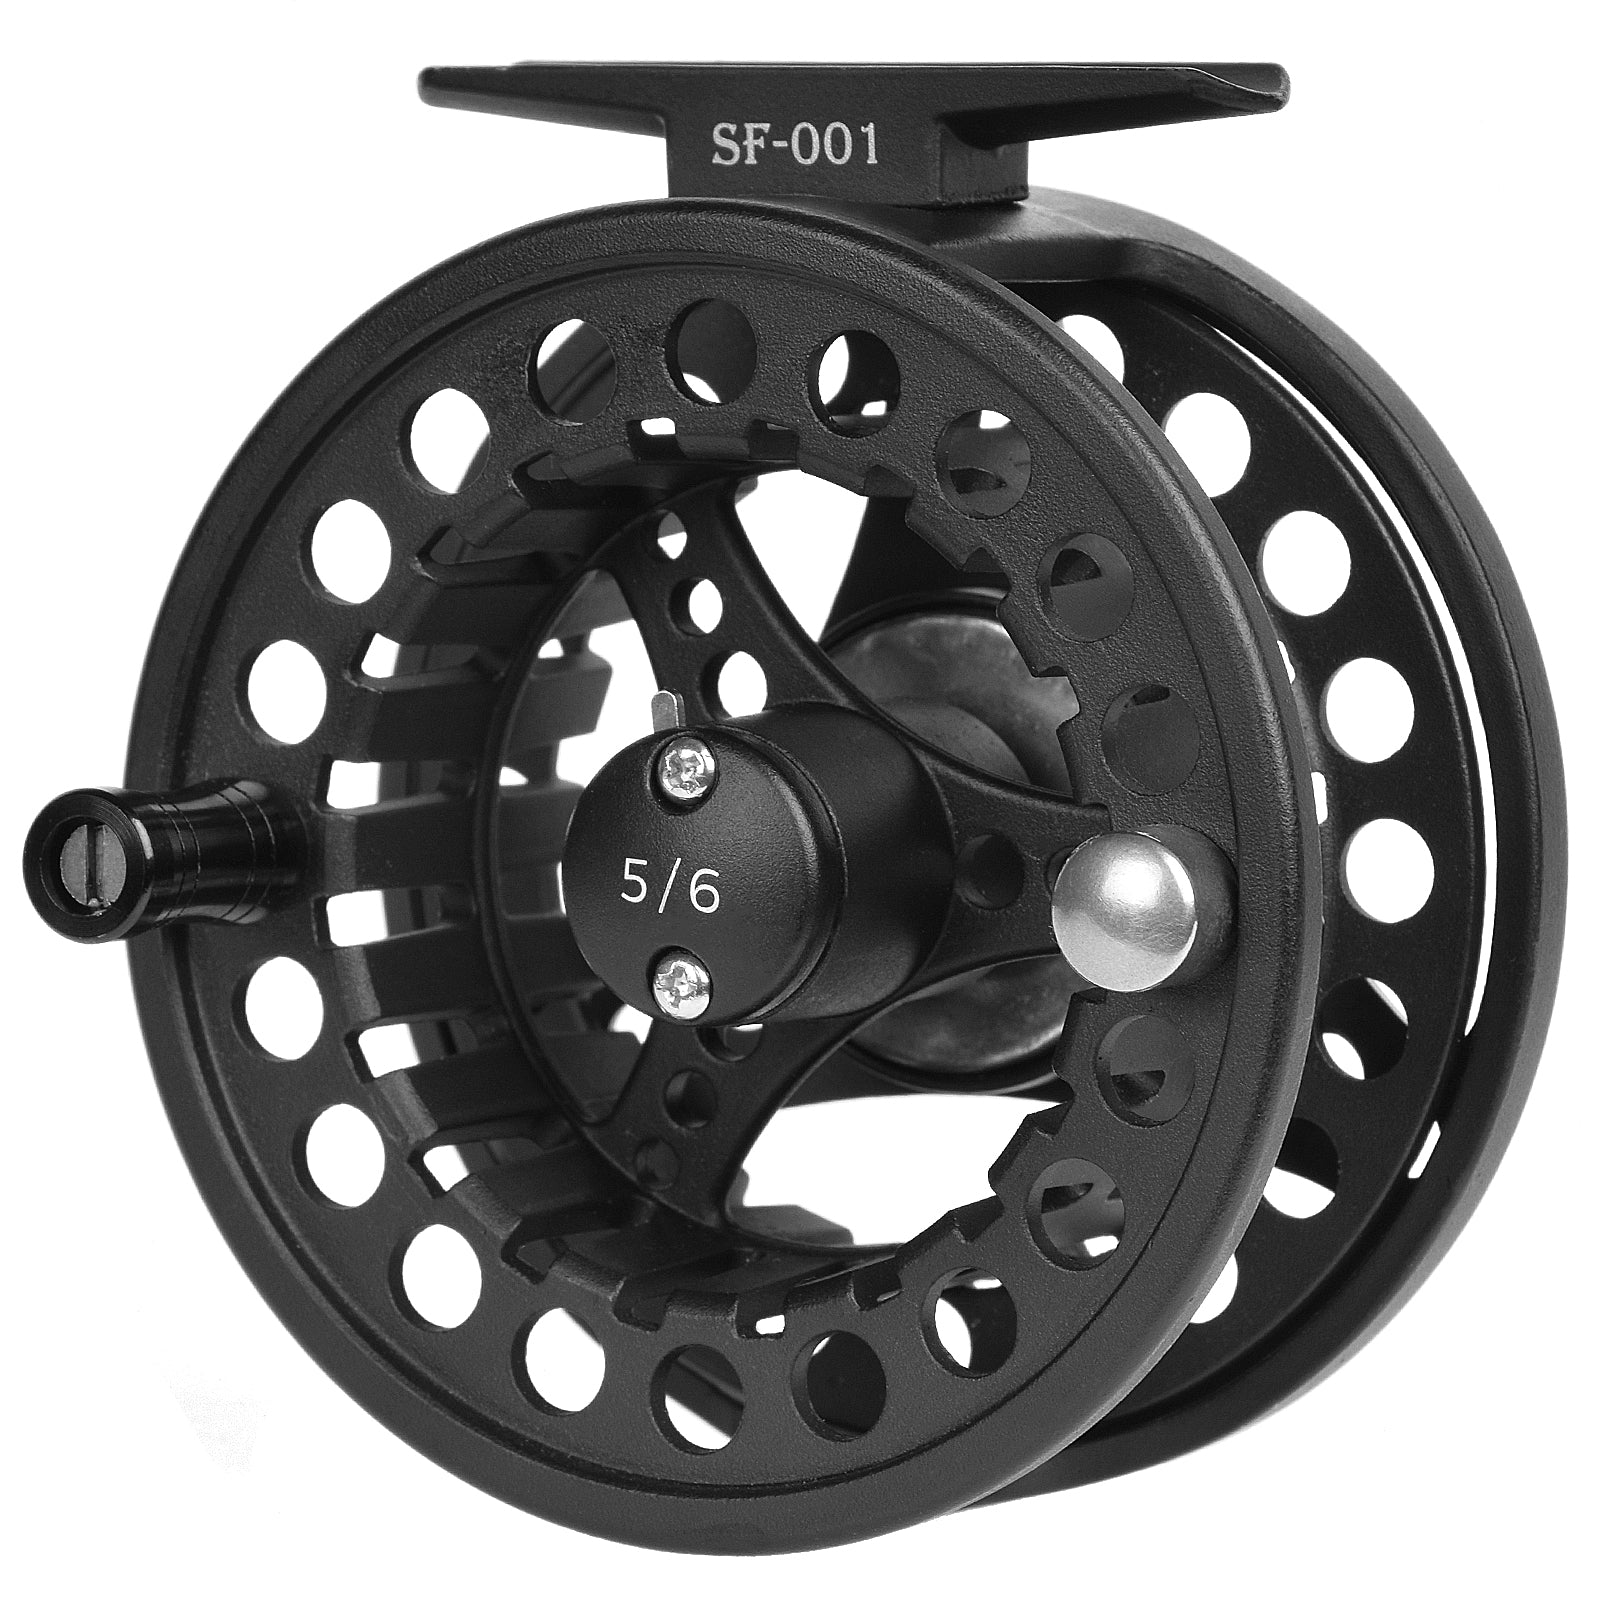 Fishing Reel Spinner Fly Fishing Reel Expert Fully Sealed CNC-machined  Aluminum Alloy Body Fishing Reel (Color : Diamond Black, Size : 9/11wt)